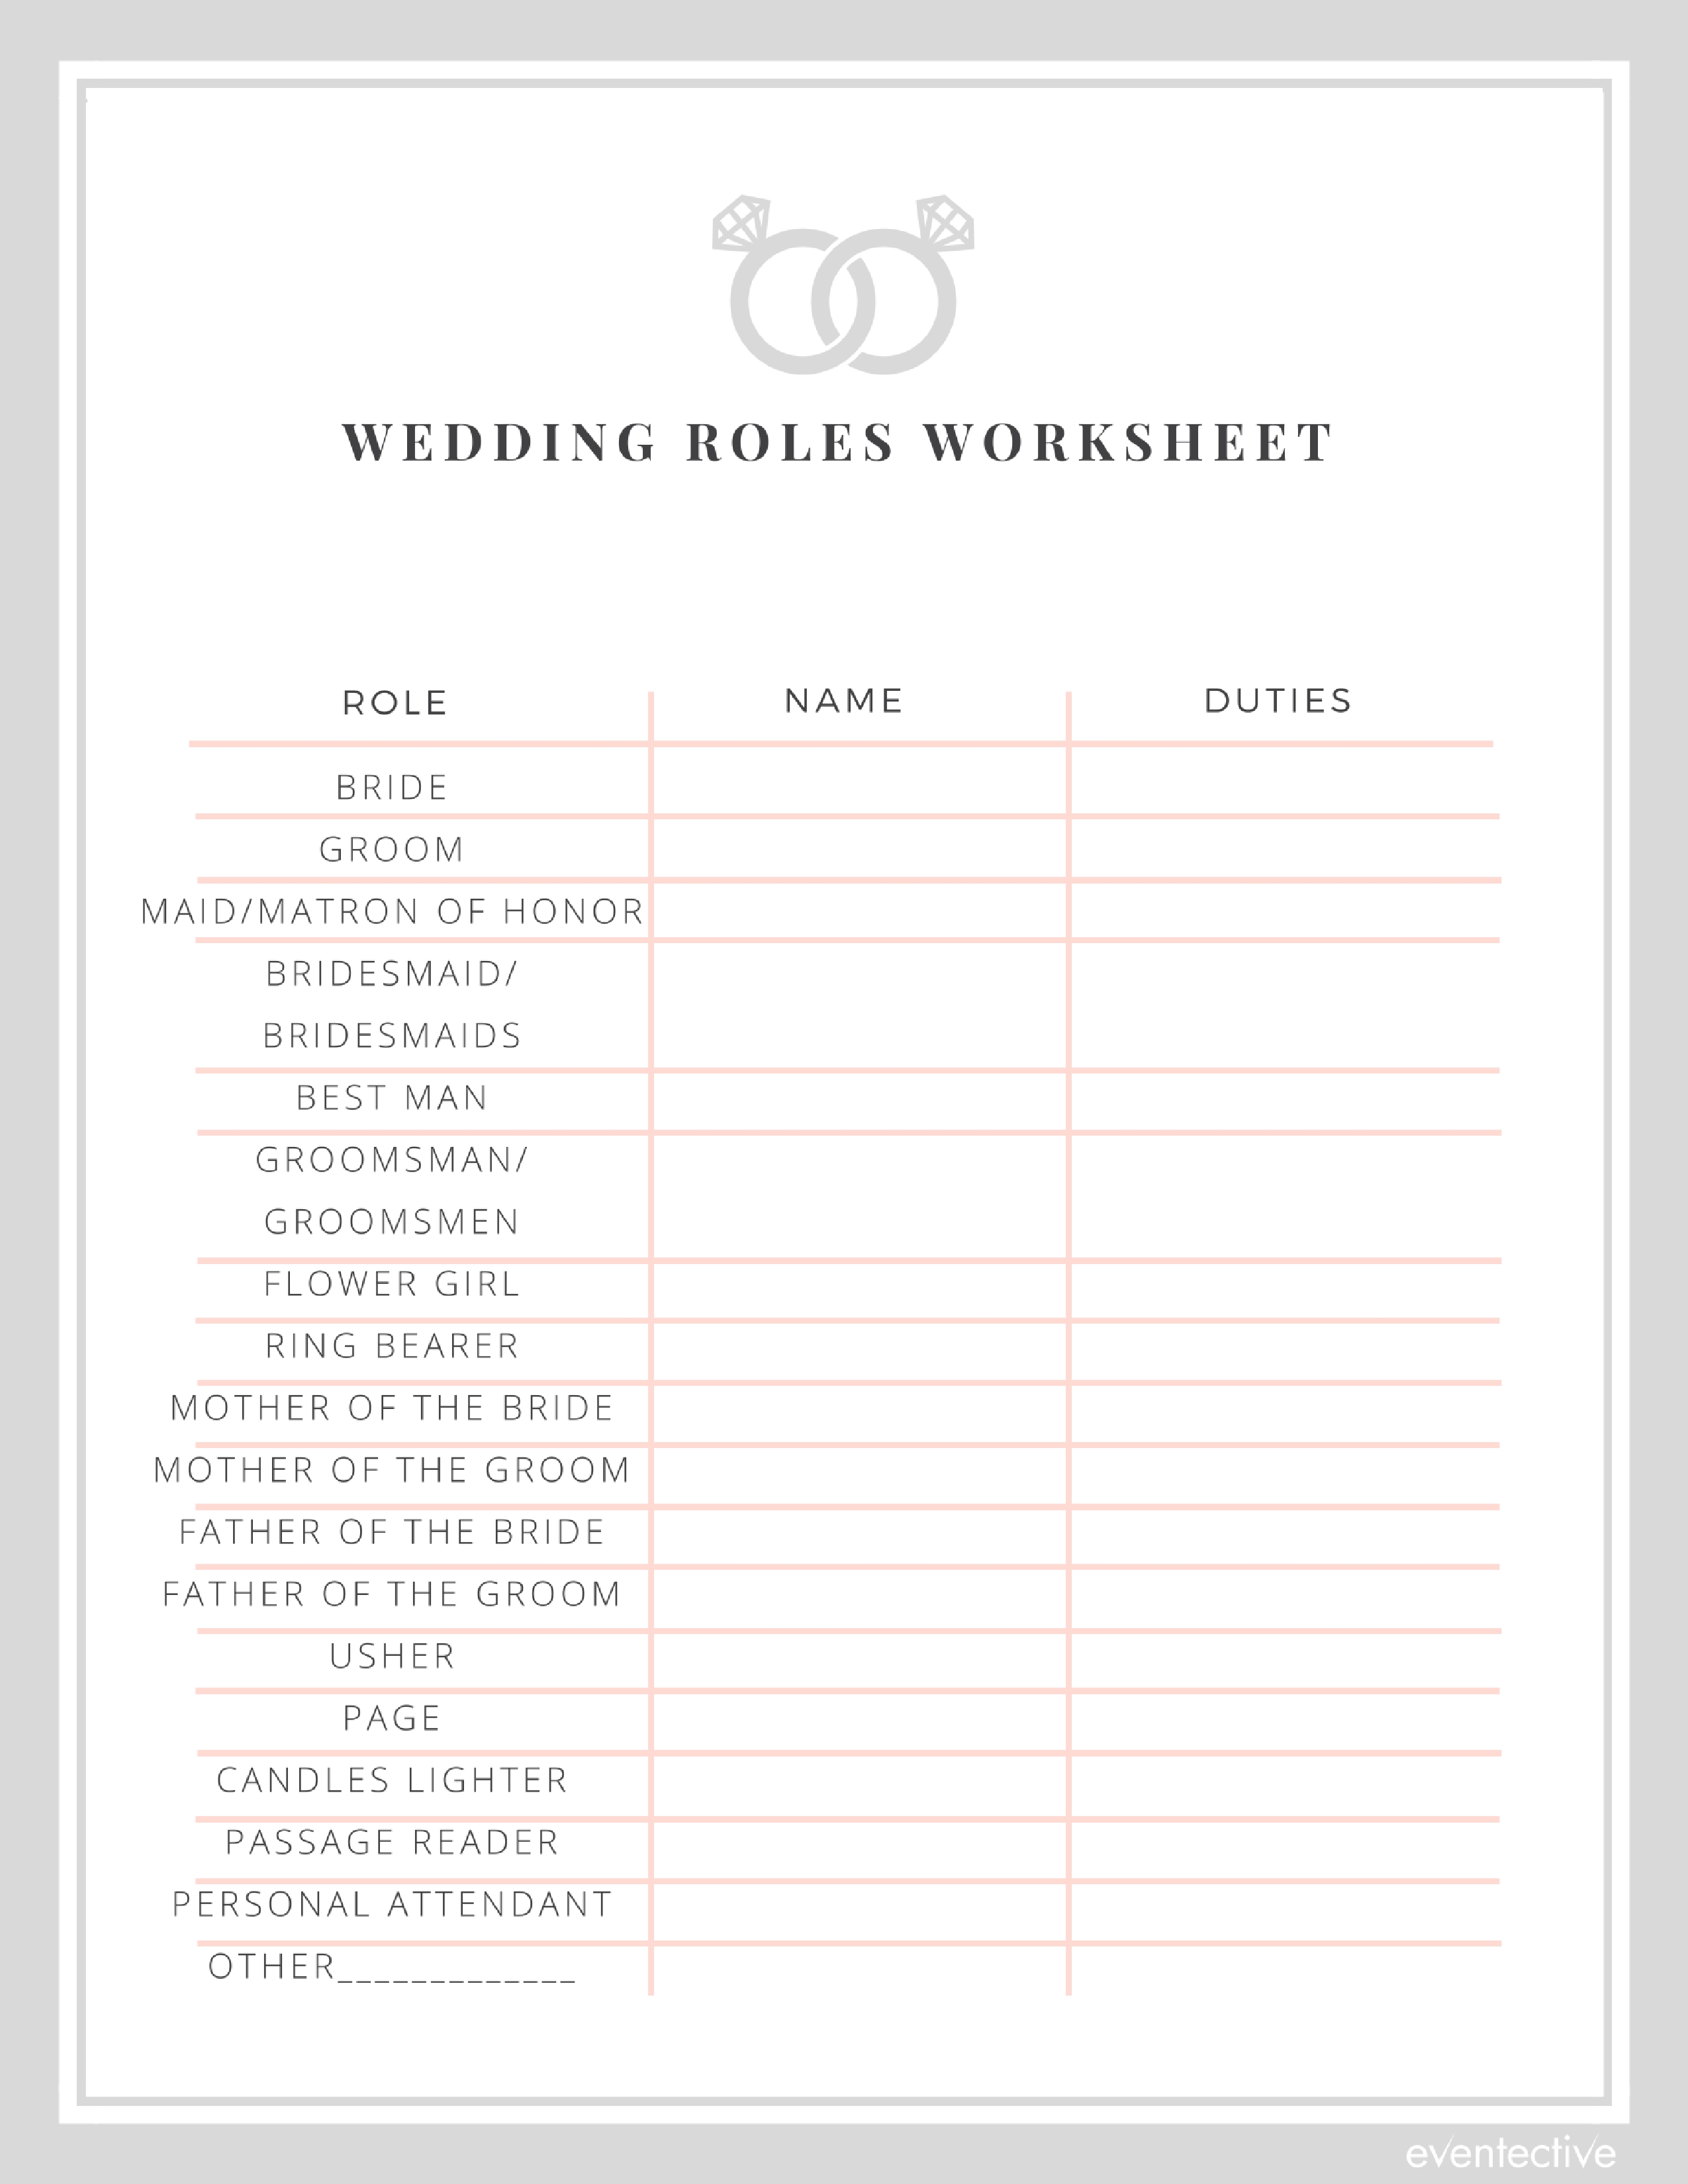 wedding-roles-worksheet-cheers-and-confetti-blog-by-eventective